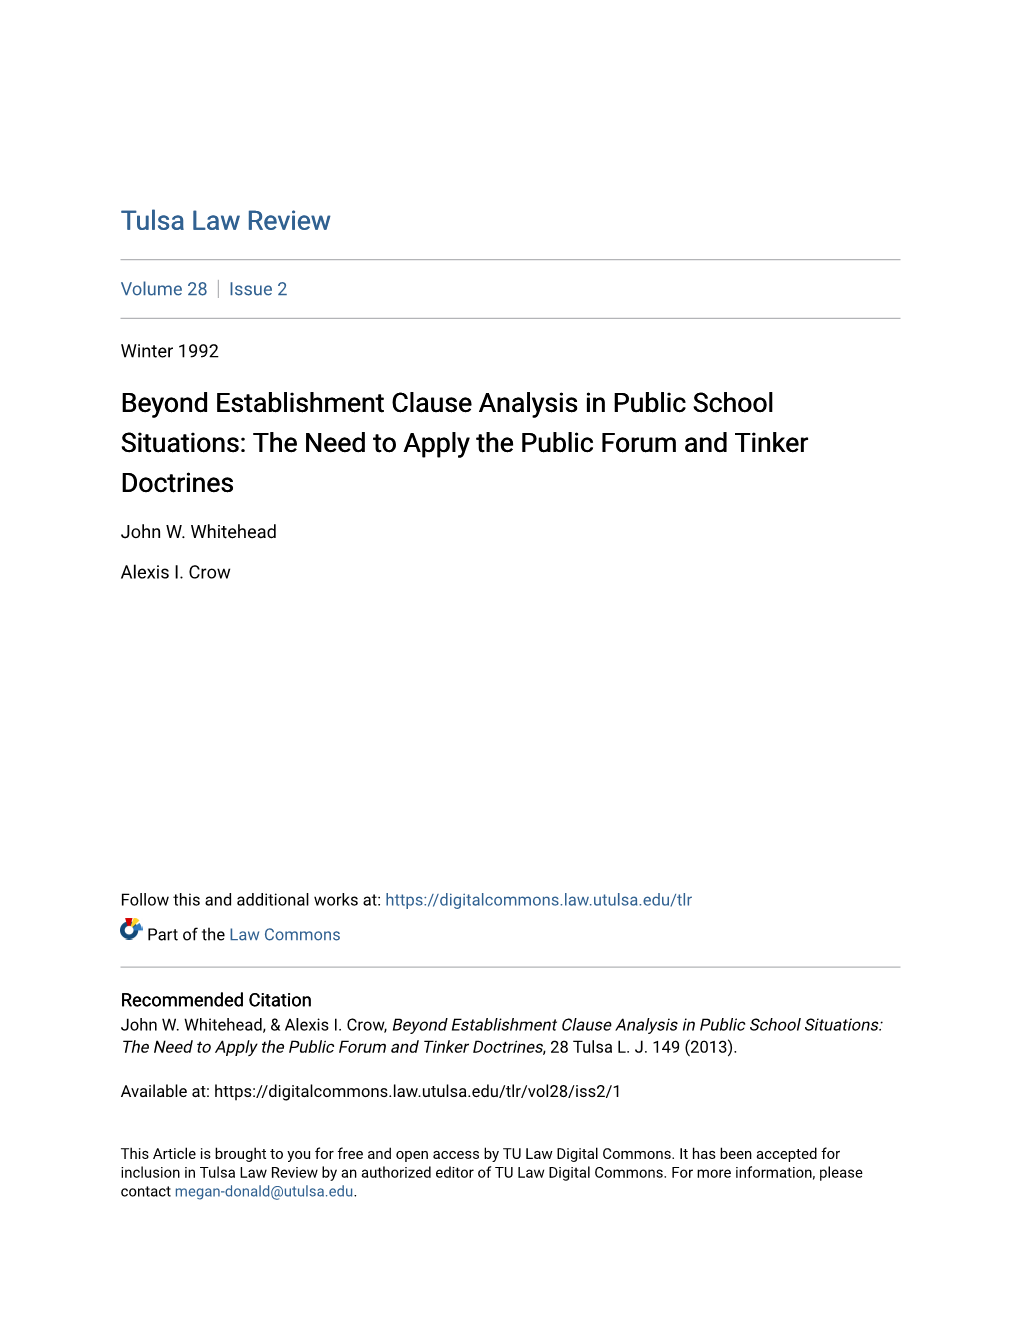 Beyond Establishment Clause Analysis in Public School Situations: the Need to Apply the Public Forum and Tinker Doctrines